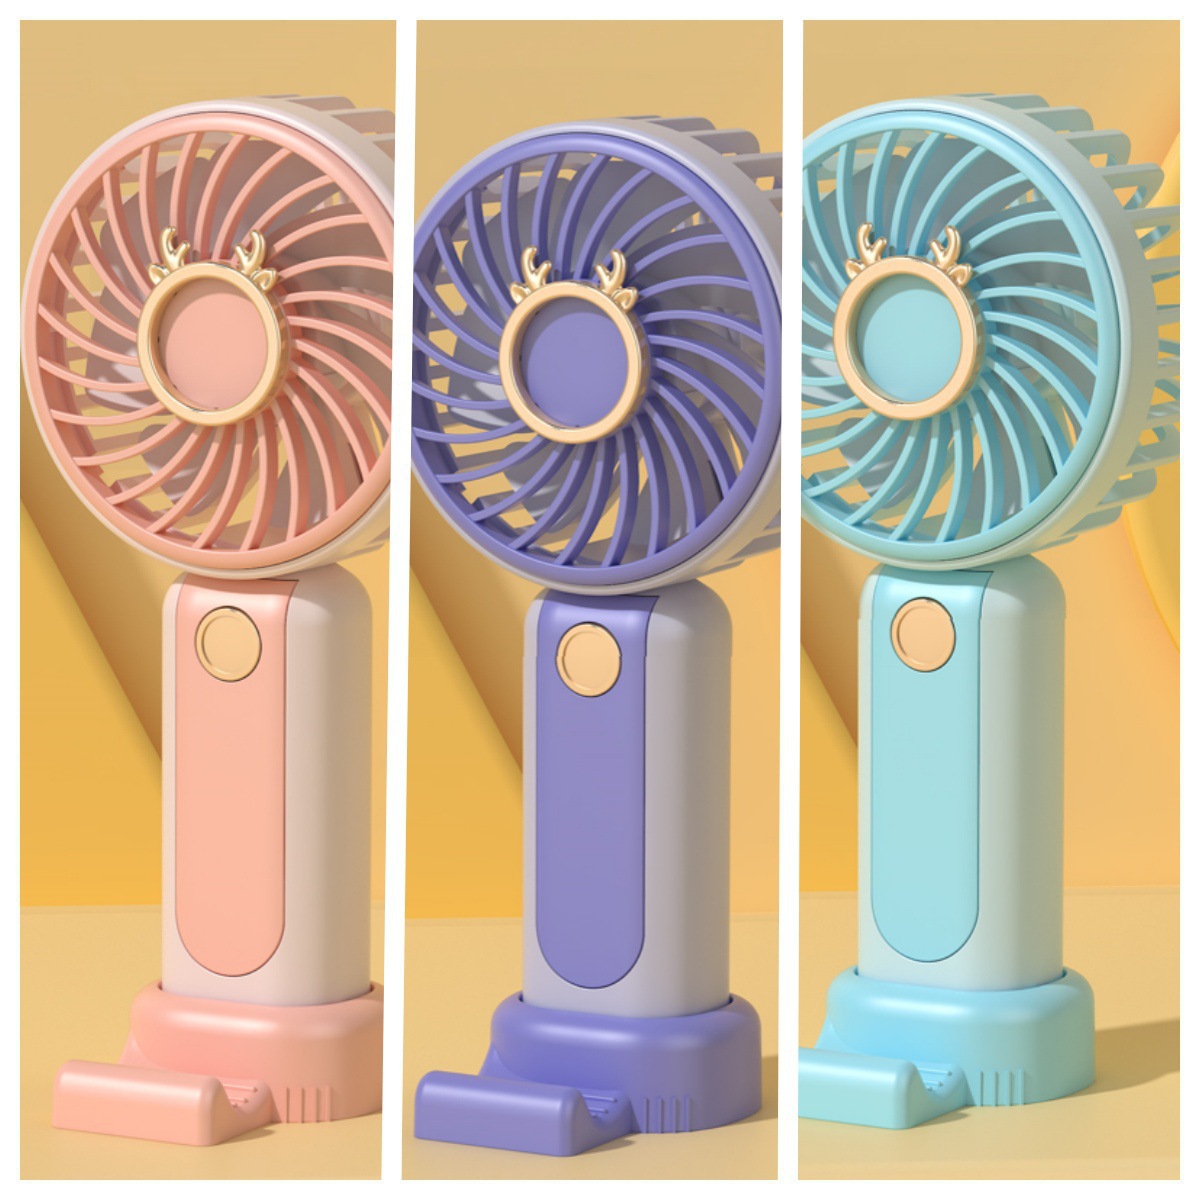 New Cartoon Handheld Fan Usb Rechargeable Small Fan Portable Portable Household Mini Small Electric Fan Student Gift